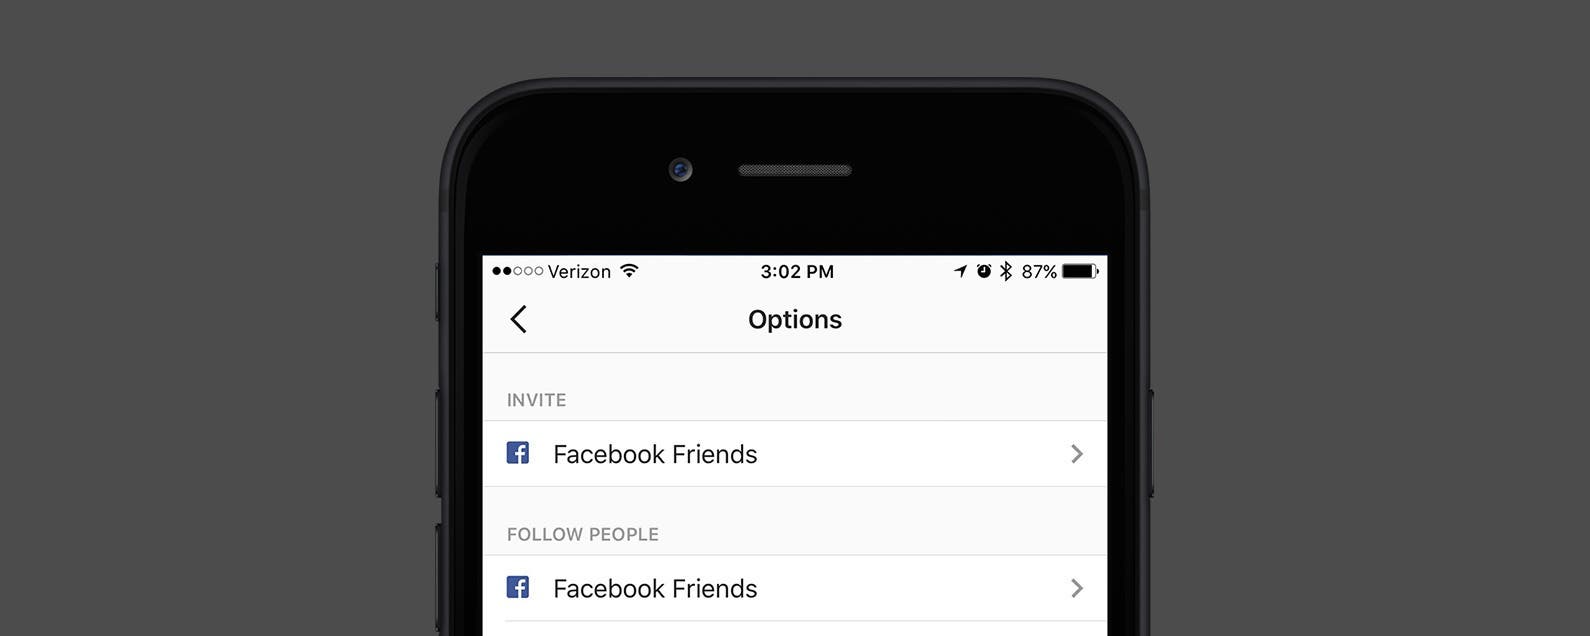 how to invite your facebook friend to join instagram - how to invite facebook friends to follow me on instagram